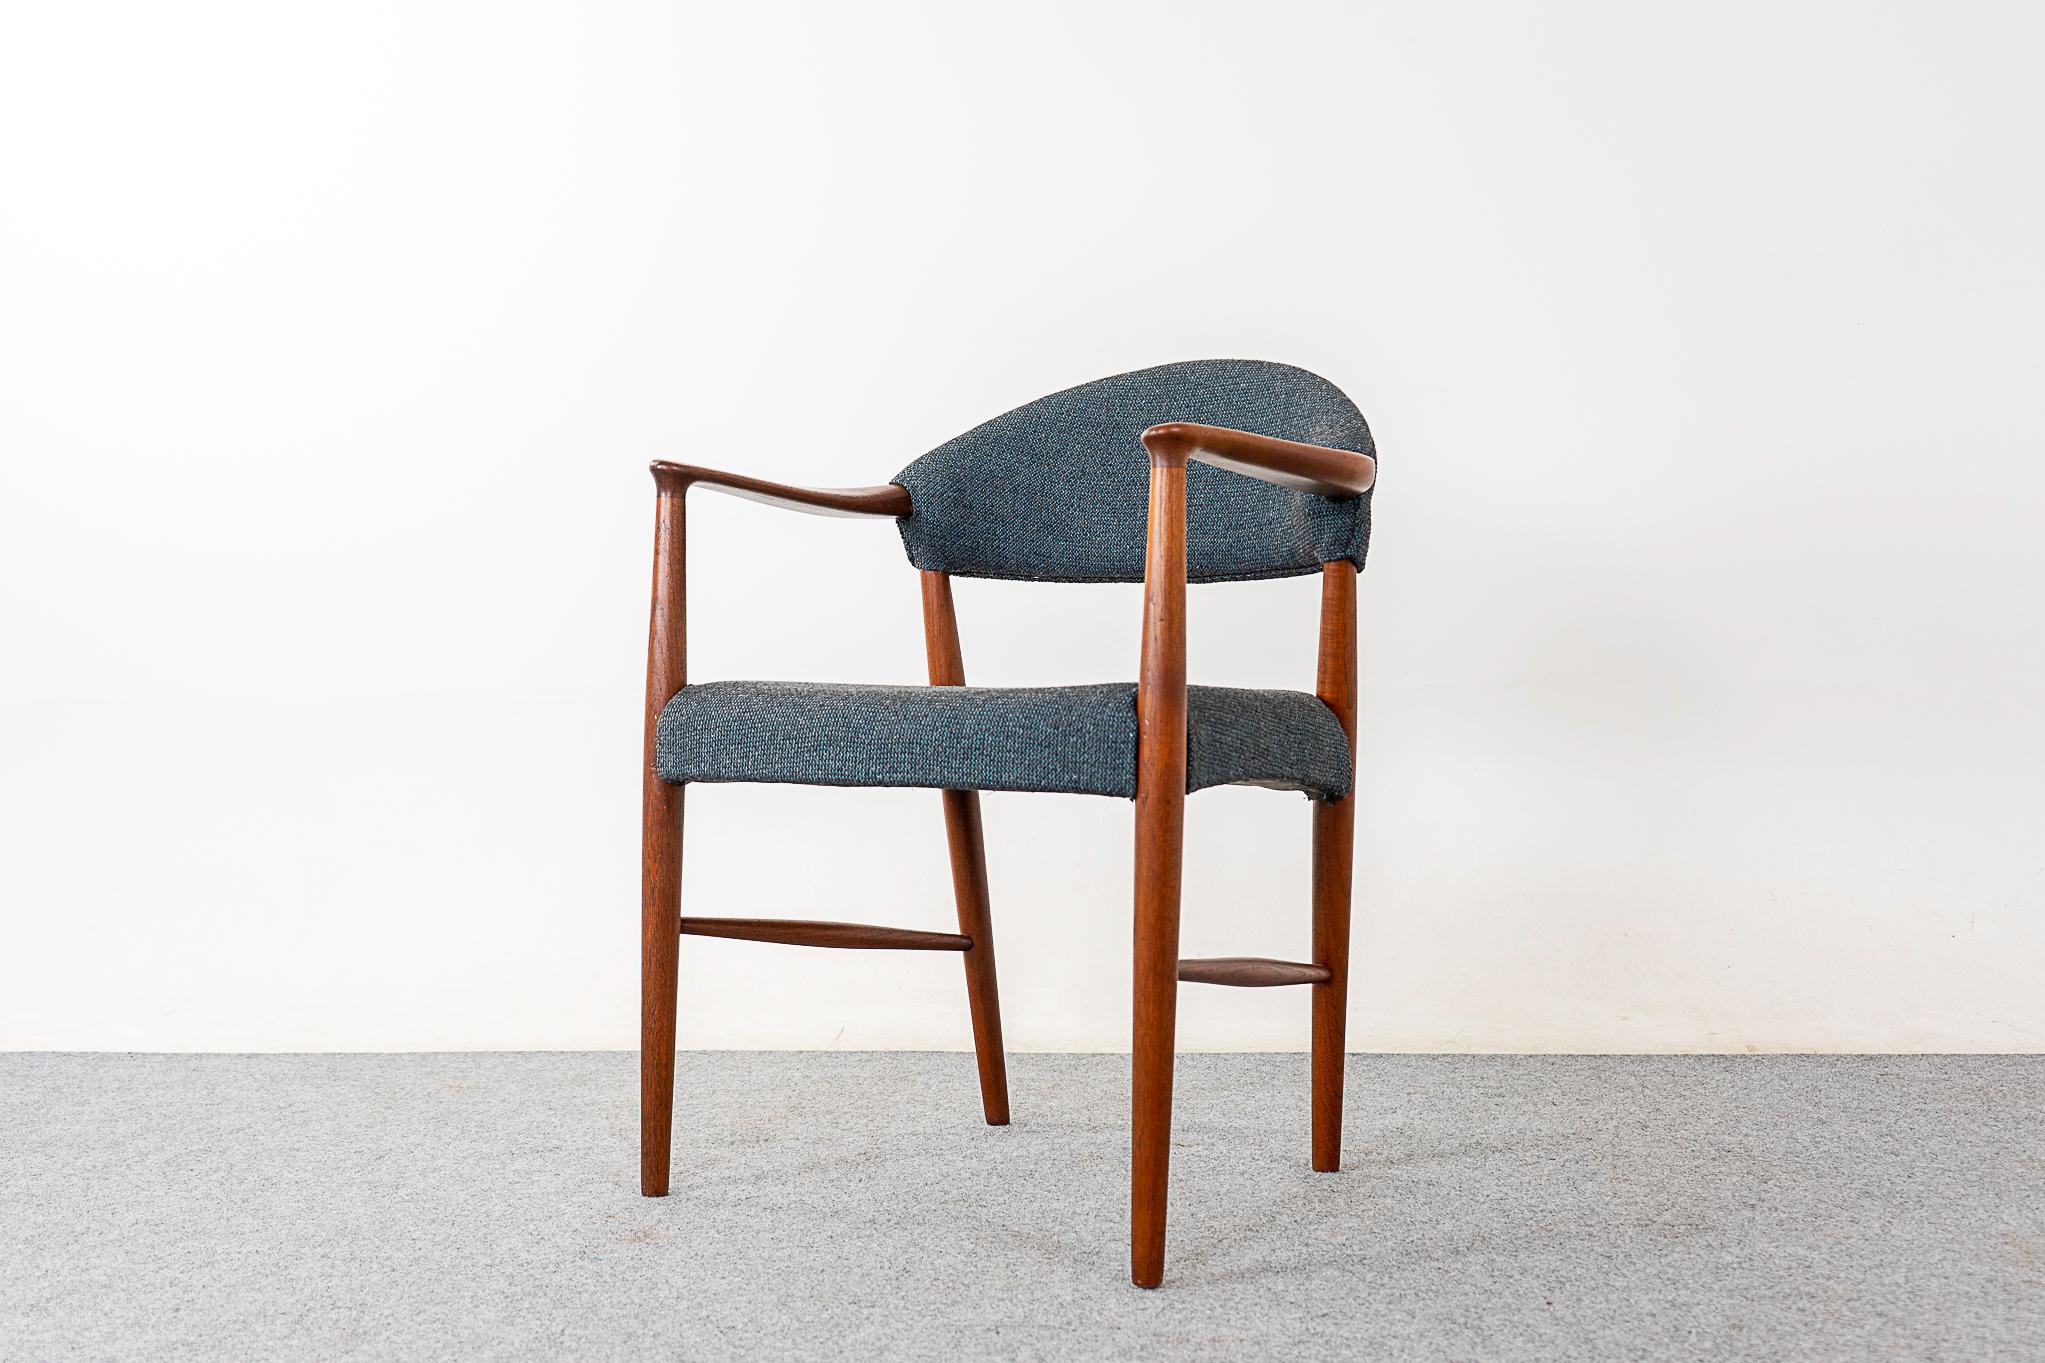 Teak Model 223 Danish arm chair by Kurt Olsen, circa 1960's. Sculptural solid wood frame with elegant details. Splayed tapering legs with spindle cross bars. Lovely grey wool upholstery.

Please inquire for remote and international shipping.